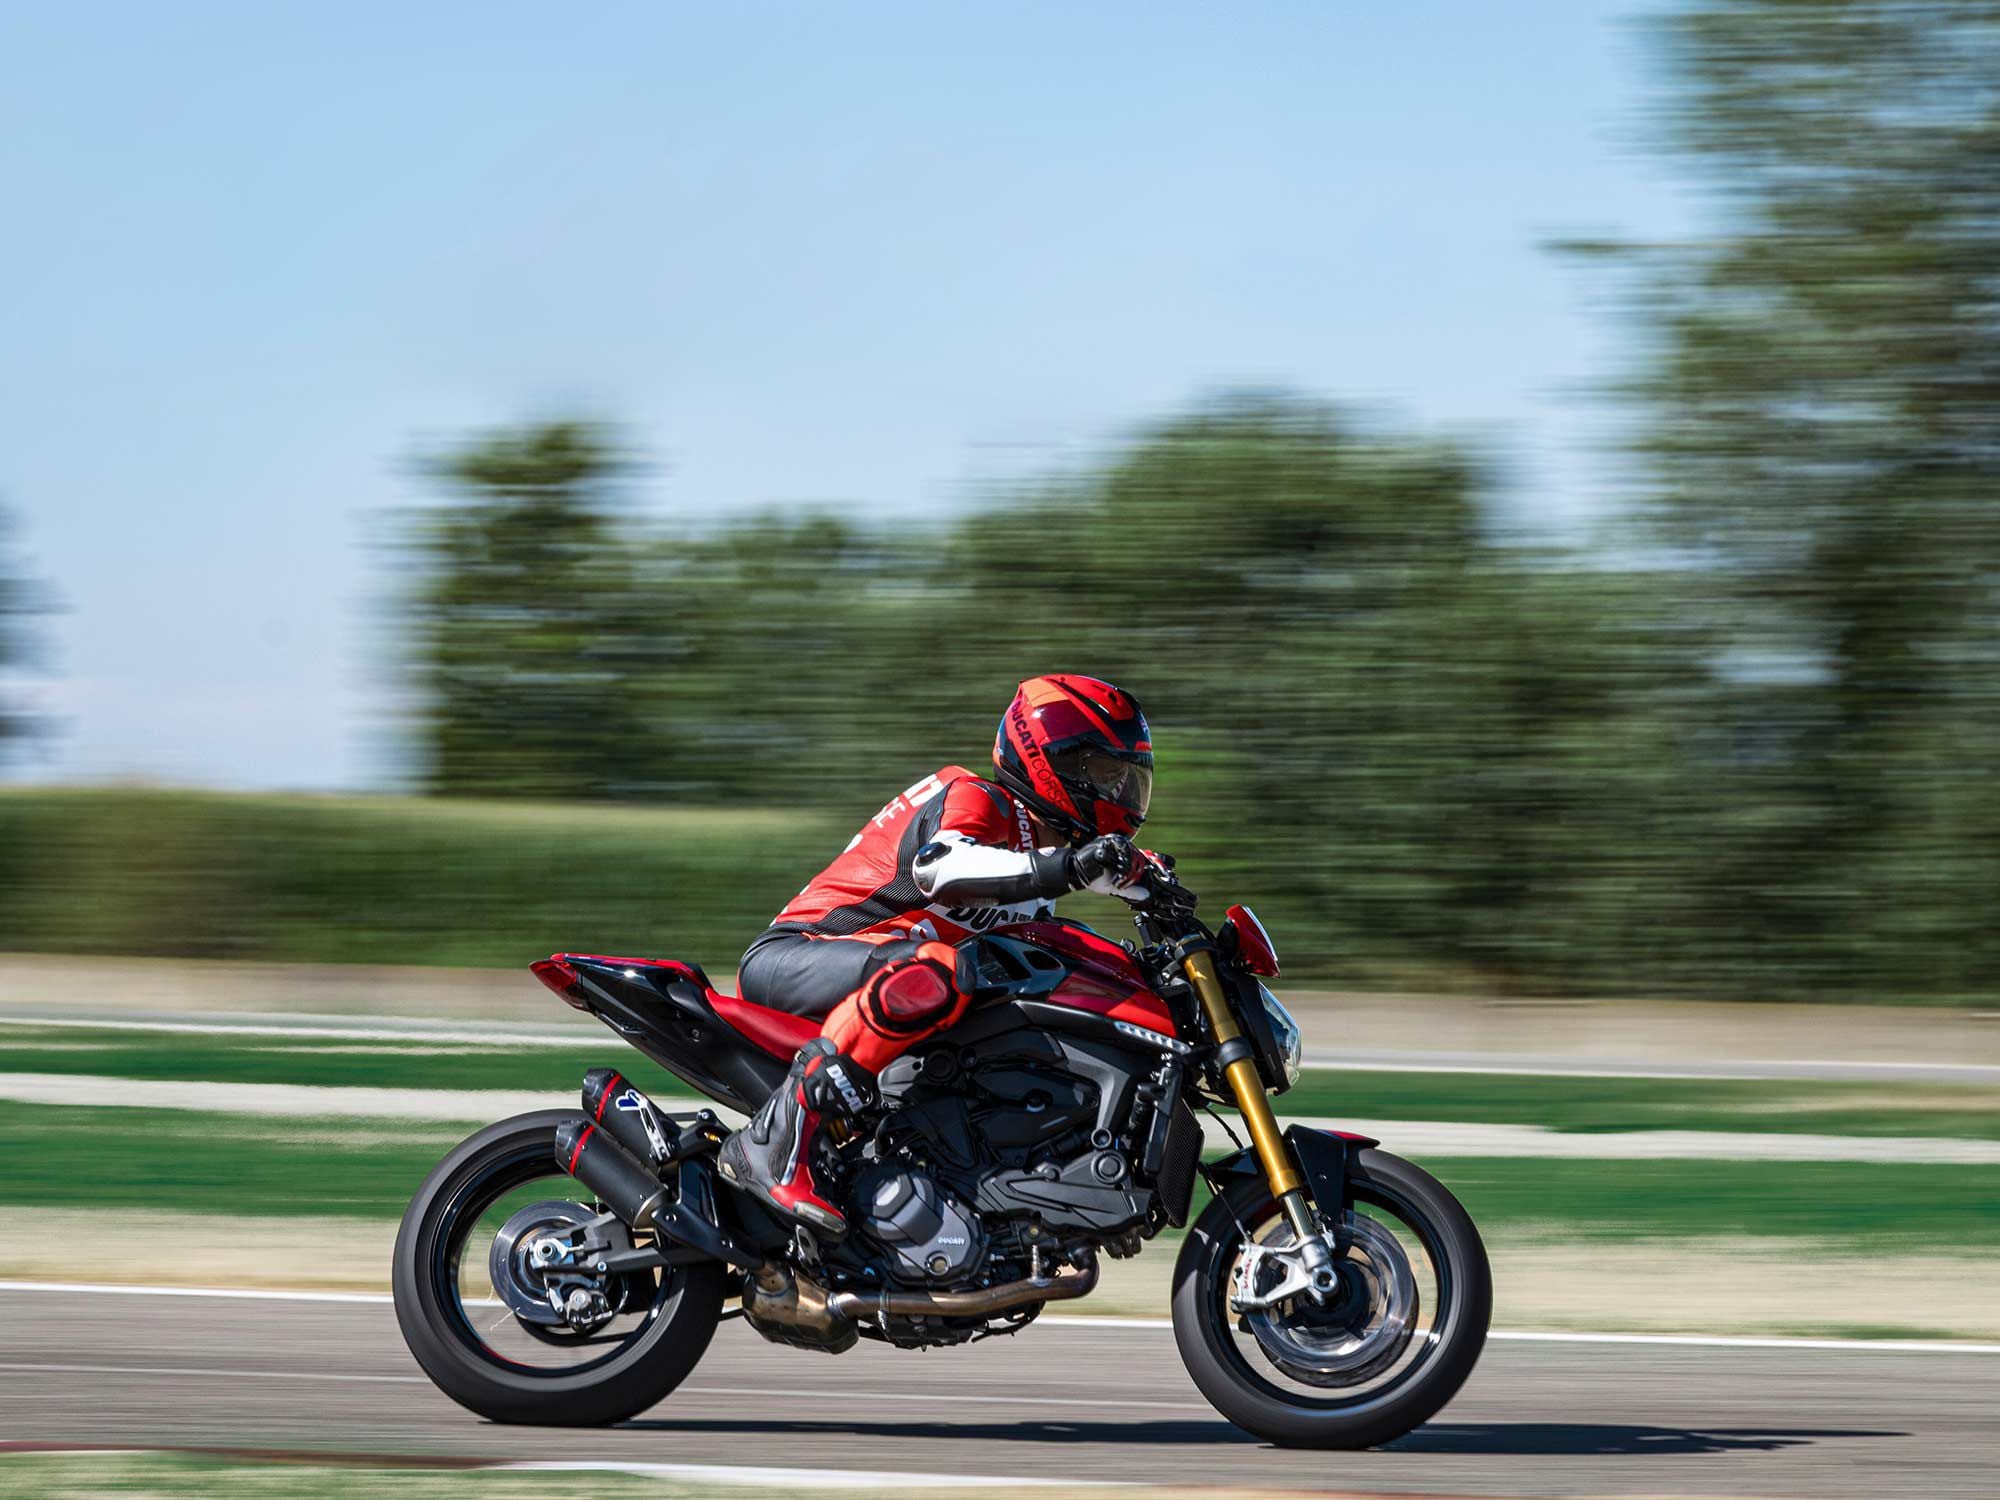 A new Wet riding mode gives riders additional confidence in challenging conditions.